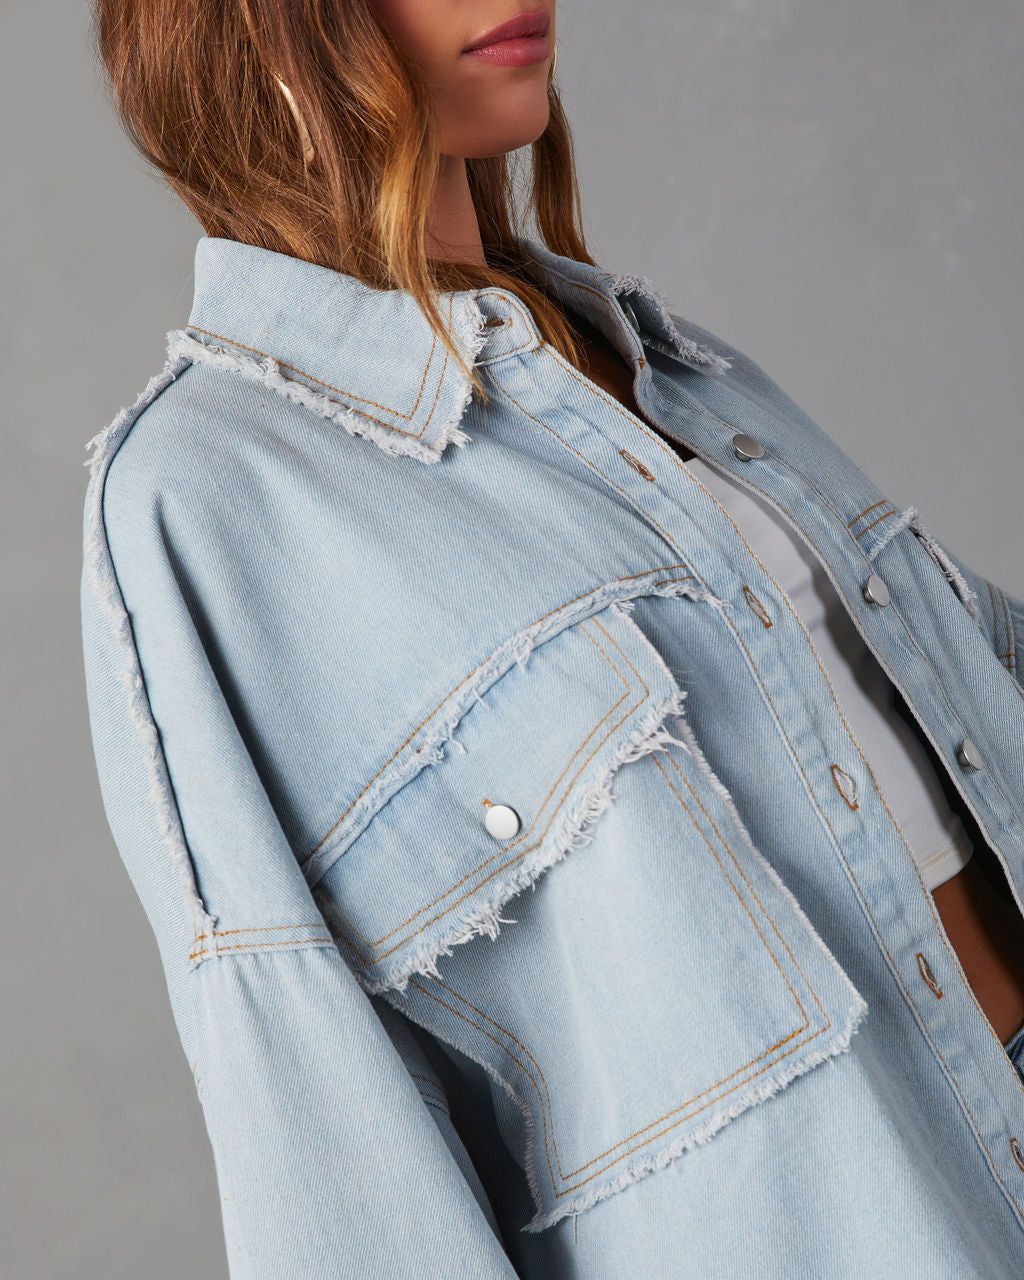 The Casual Denim Jacket